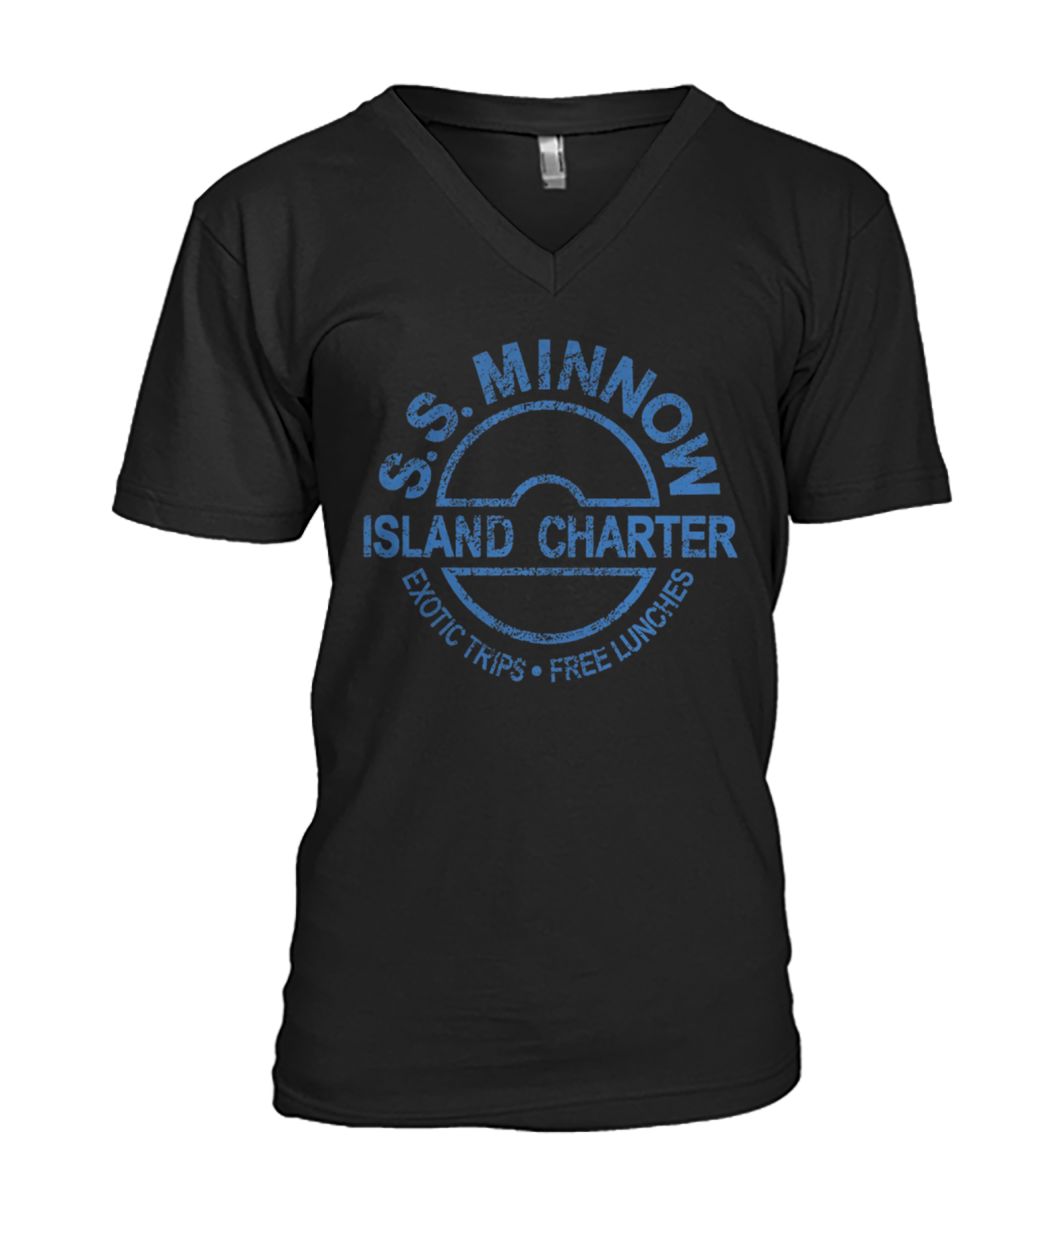 SS minnow island charter exotic trips free lunches mens v-neck